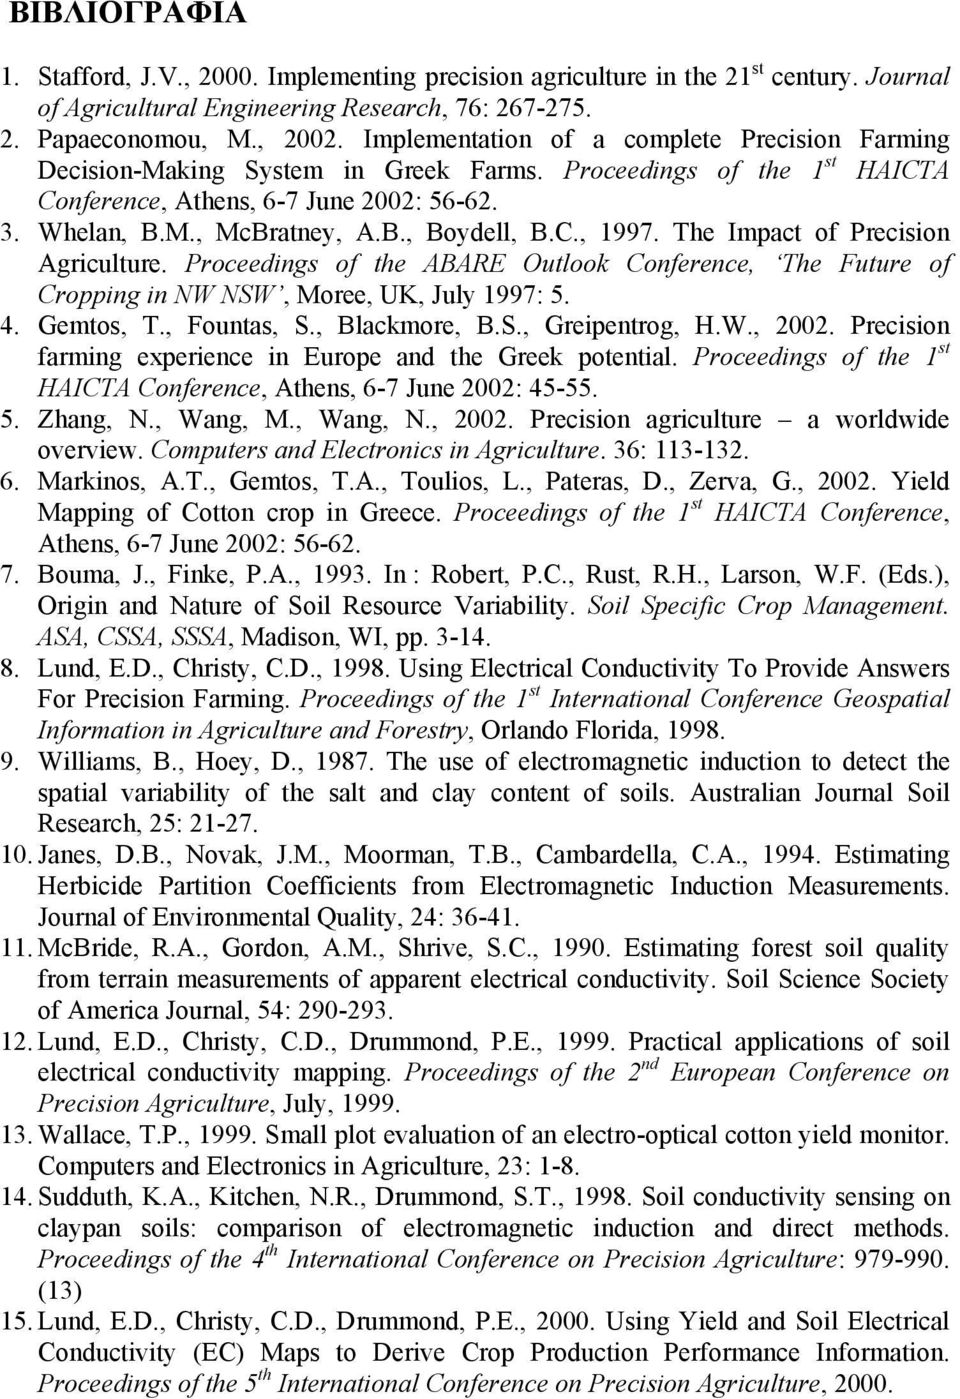 C., 1997. The Impact of Precision Agriculture. Proceedings of the ABARE Outlook Conference, The Future of Cropping in NW NSW, Moree, UK, July 1997: 5. 4. Gemtos, T., Fountas, S., Blackmore, B.S., Greipentrog, H.